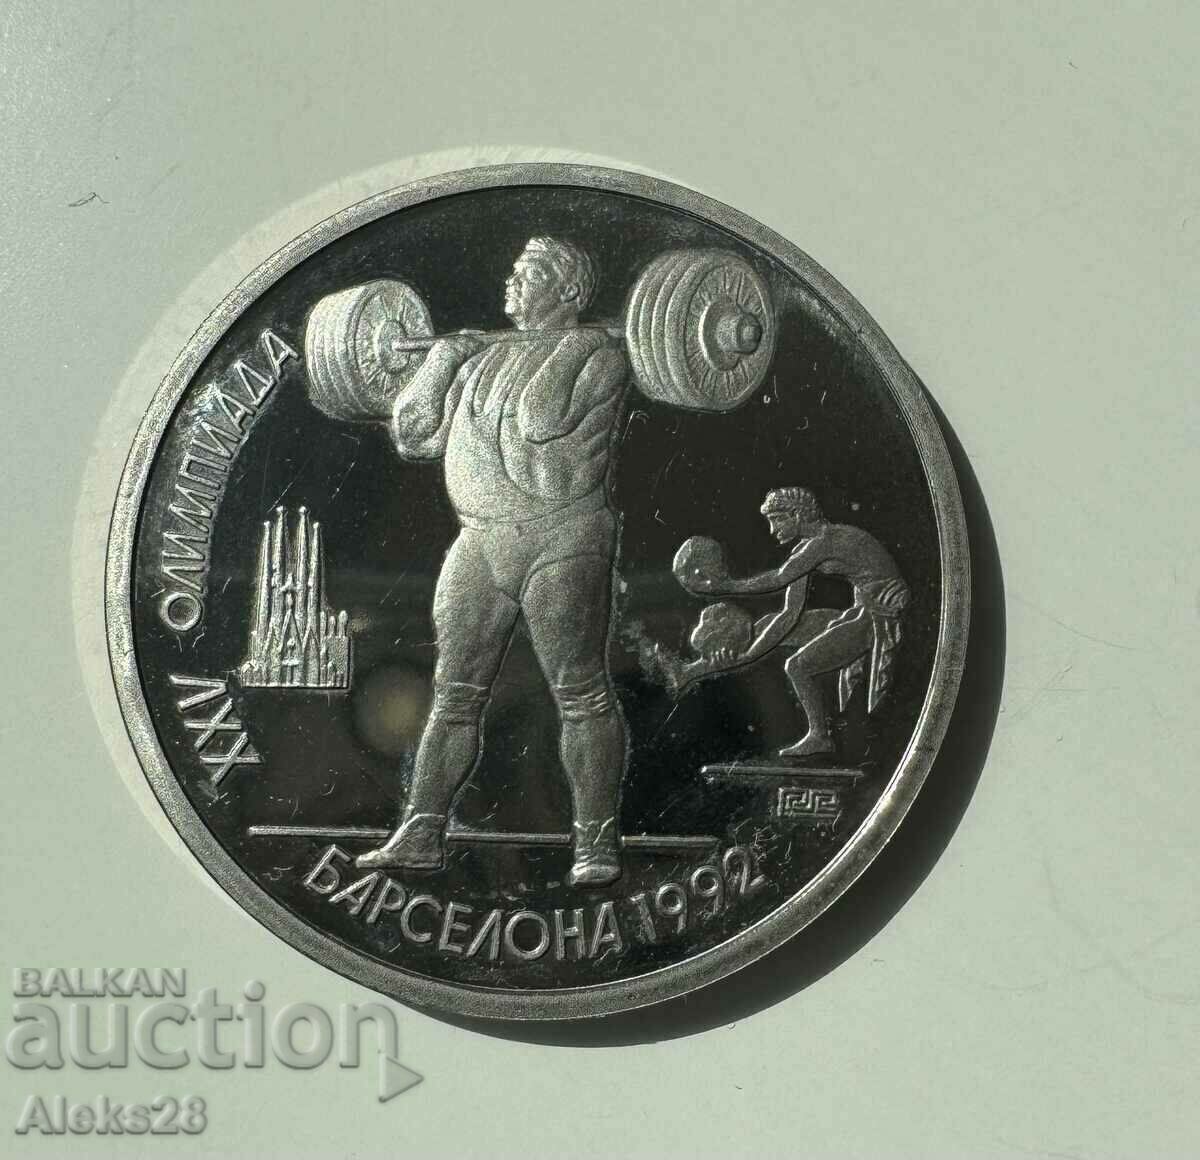 1 ruble Barcelona 1992, Weightlifting